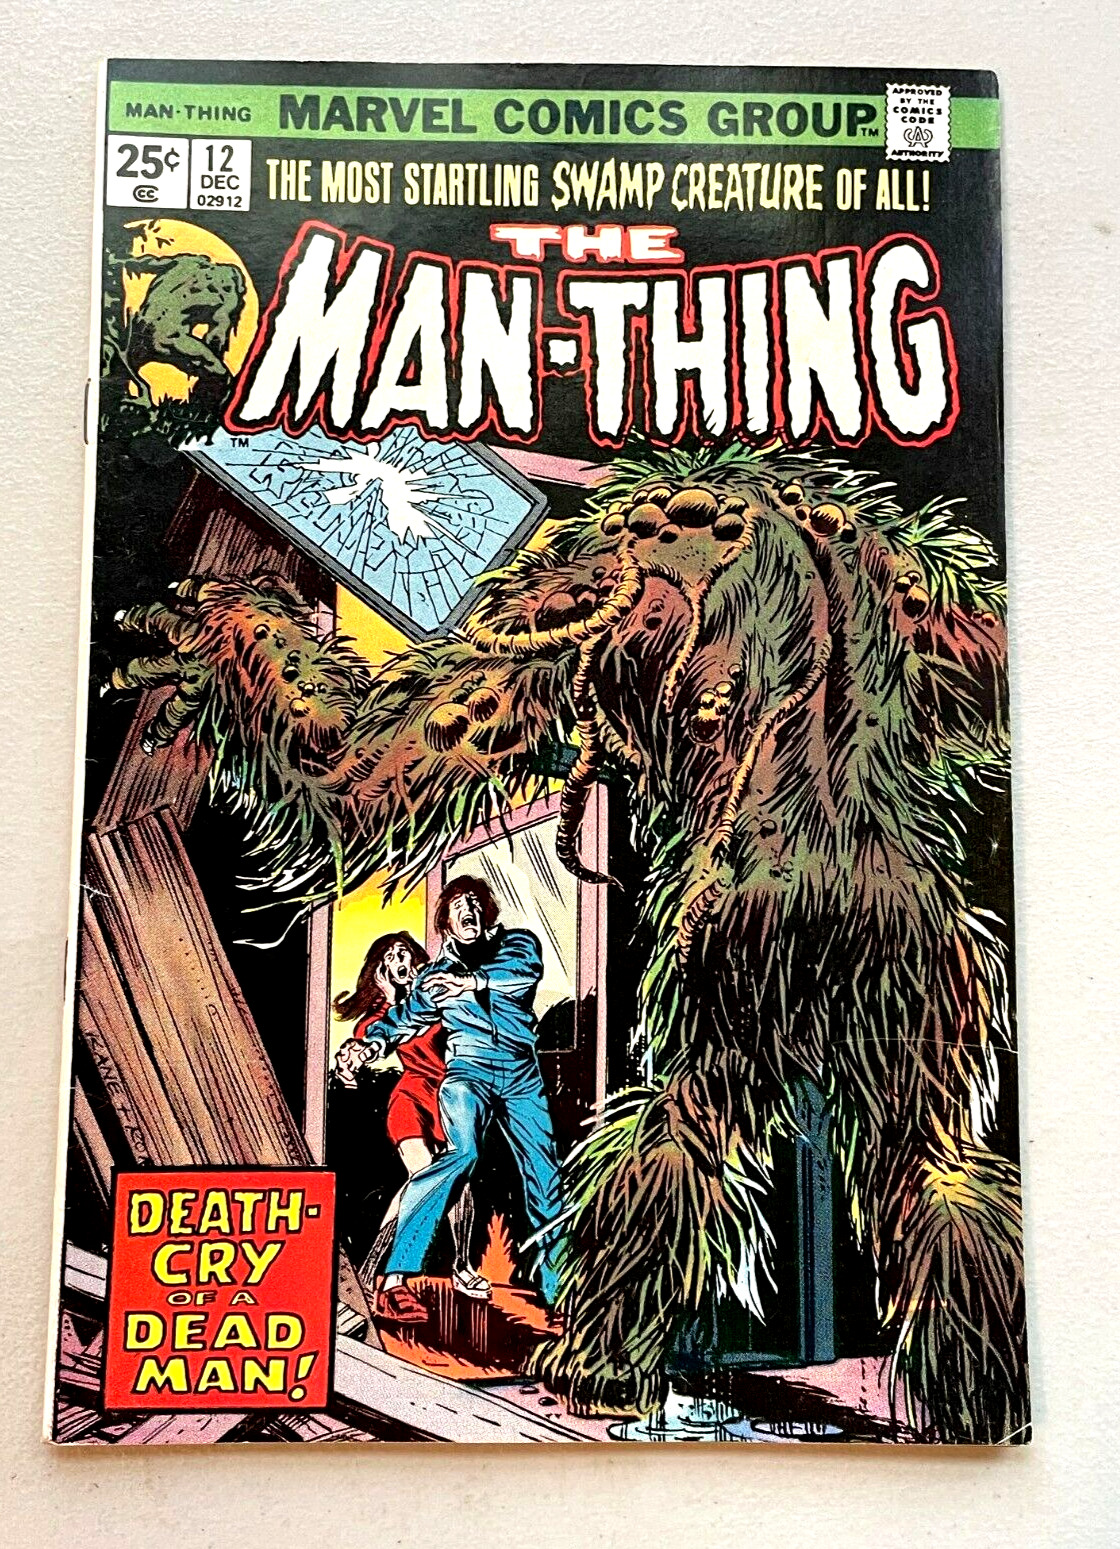 The Man-Thing #12 (Marvel 1974) F/VF, Song Cry of the Living Dead Man